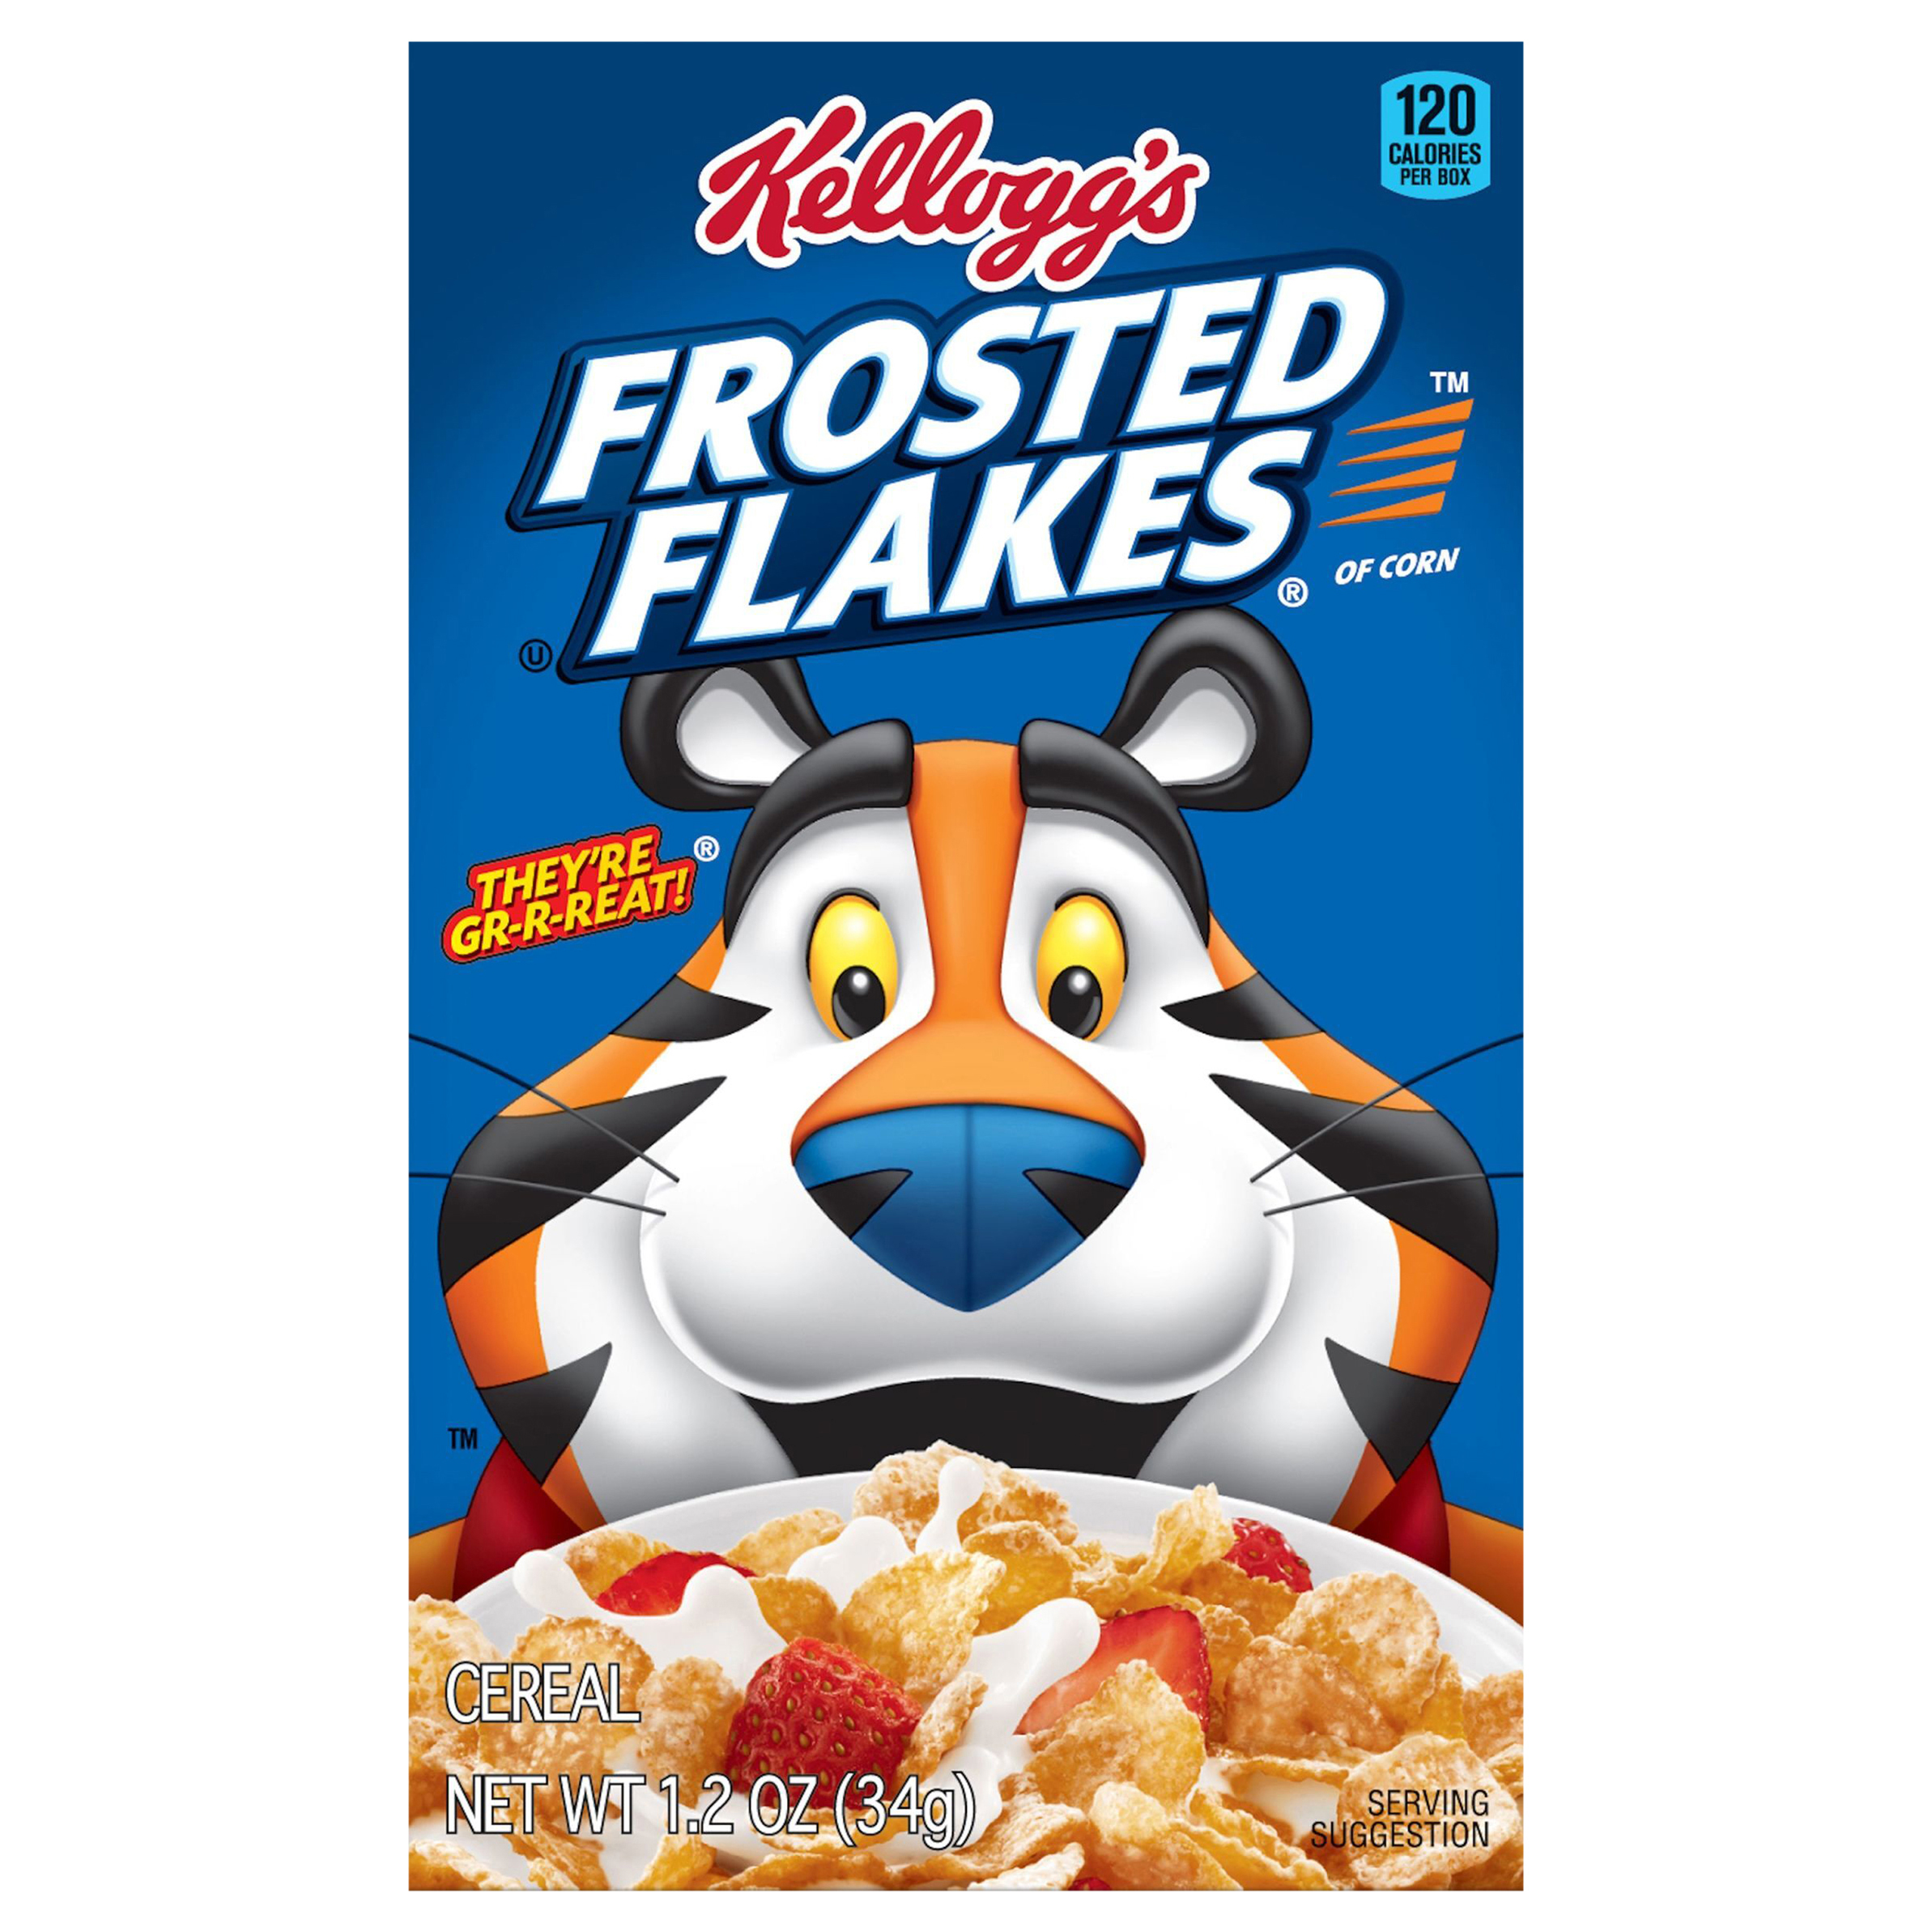 Cereal image